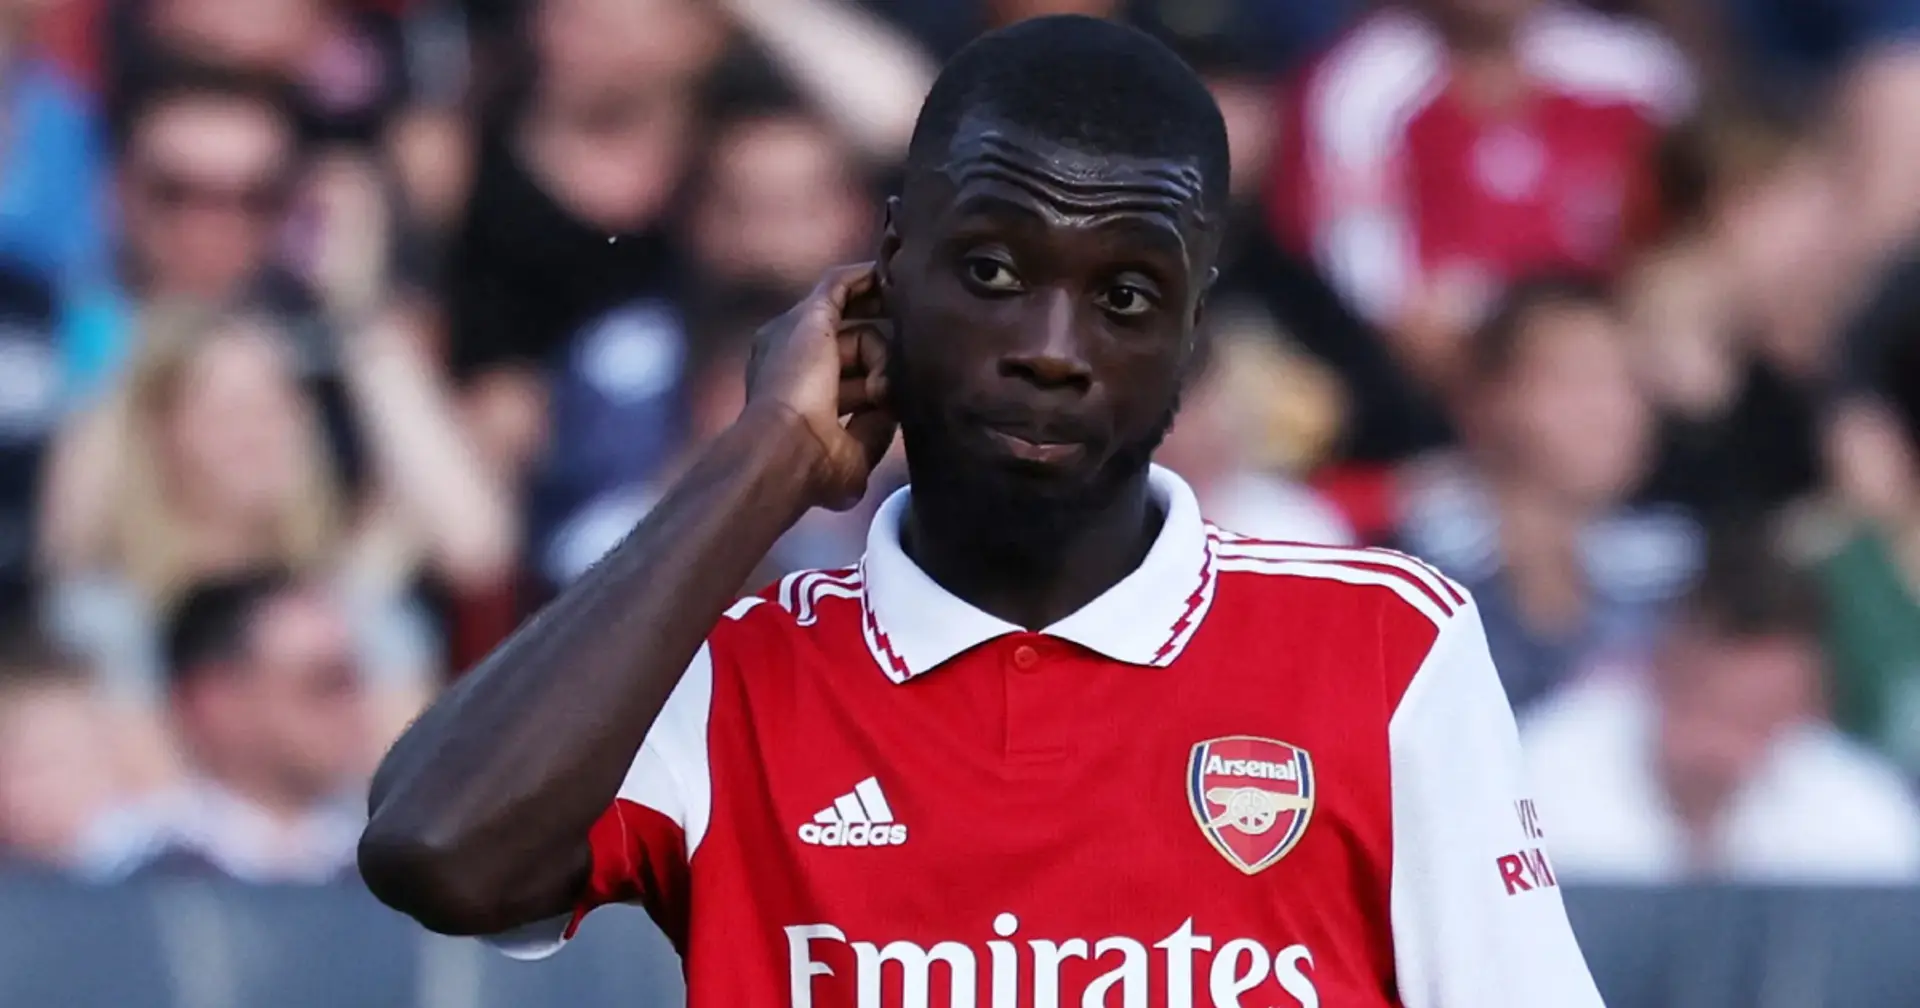 Arsenal report millions in financial loses — it's mostly because of Nicolas Pepe